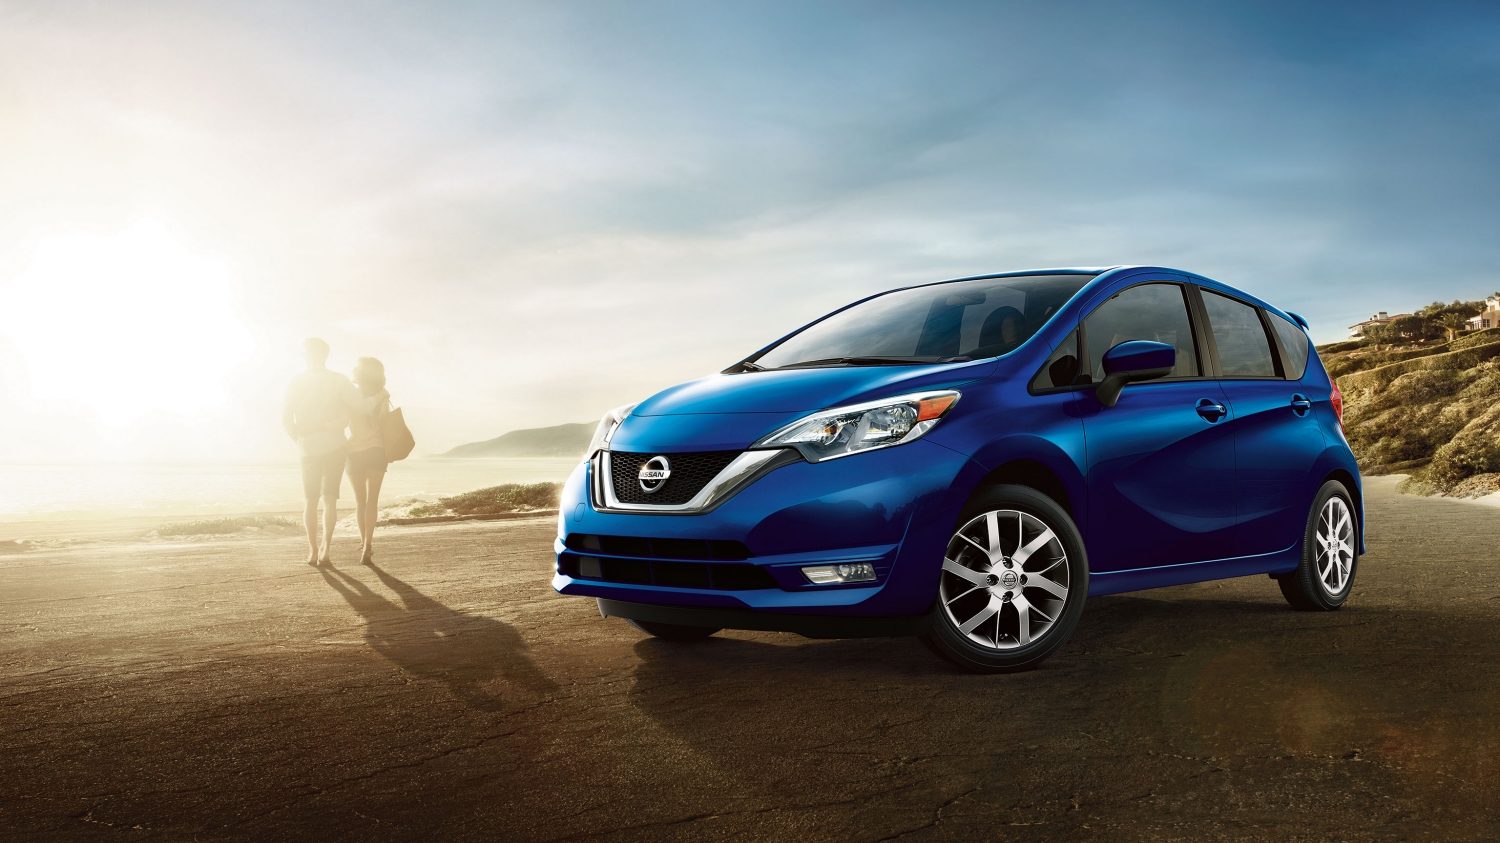 A couple walks away from their blue Nissan Versa Note hatchback parked on a beach